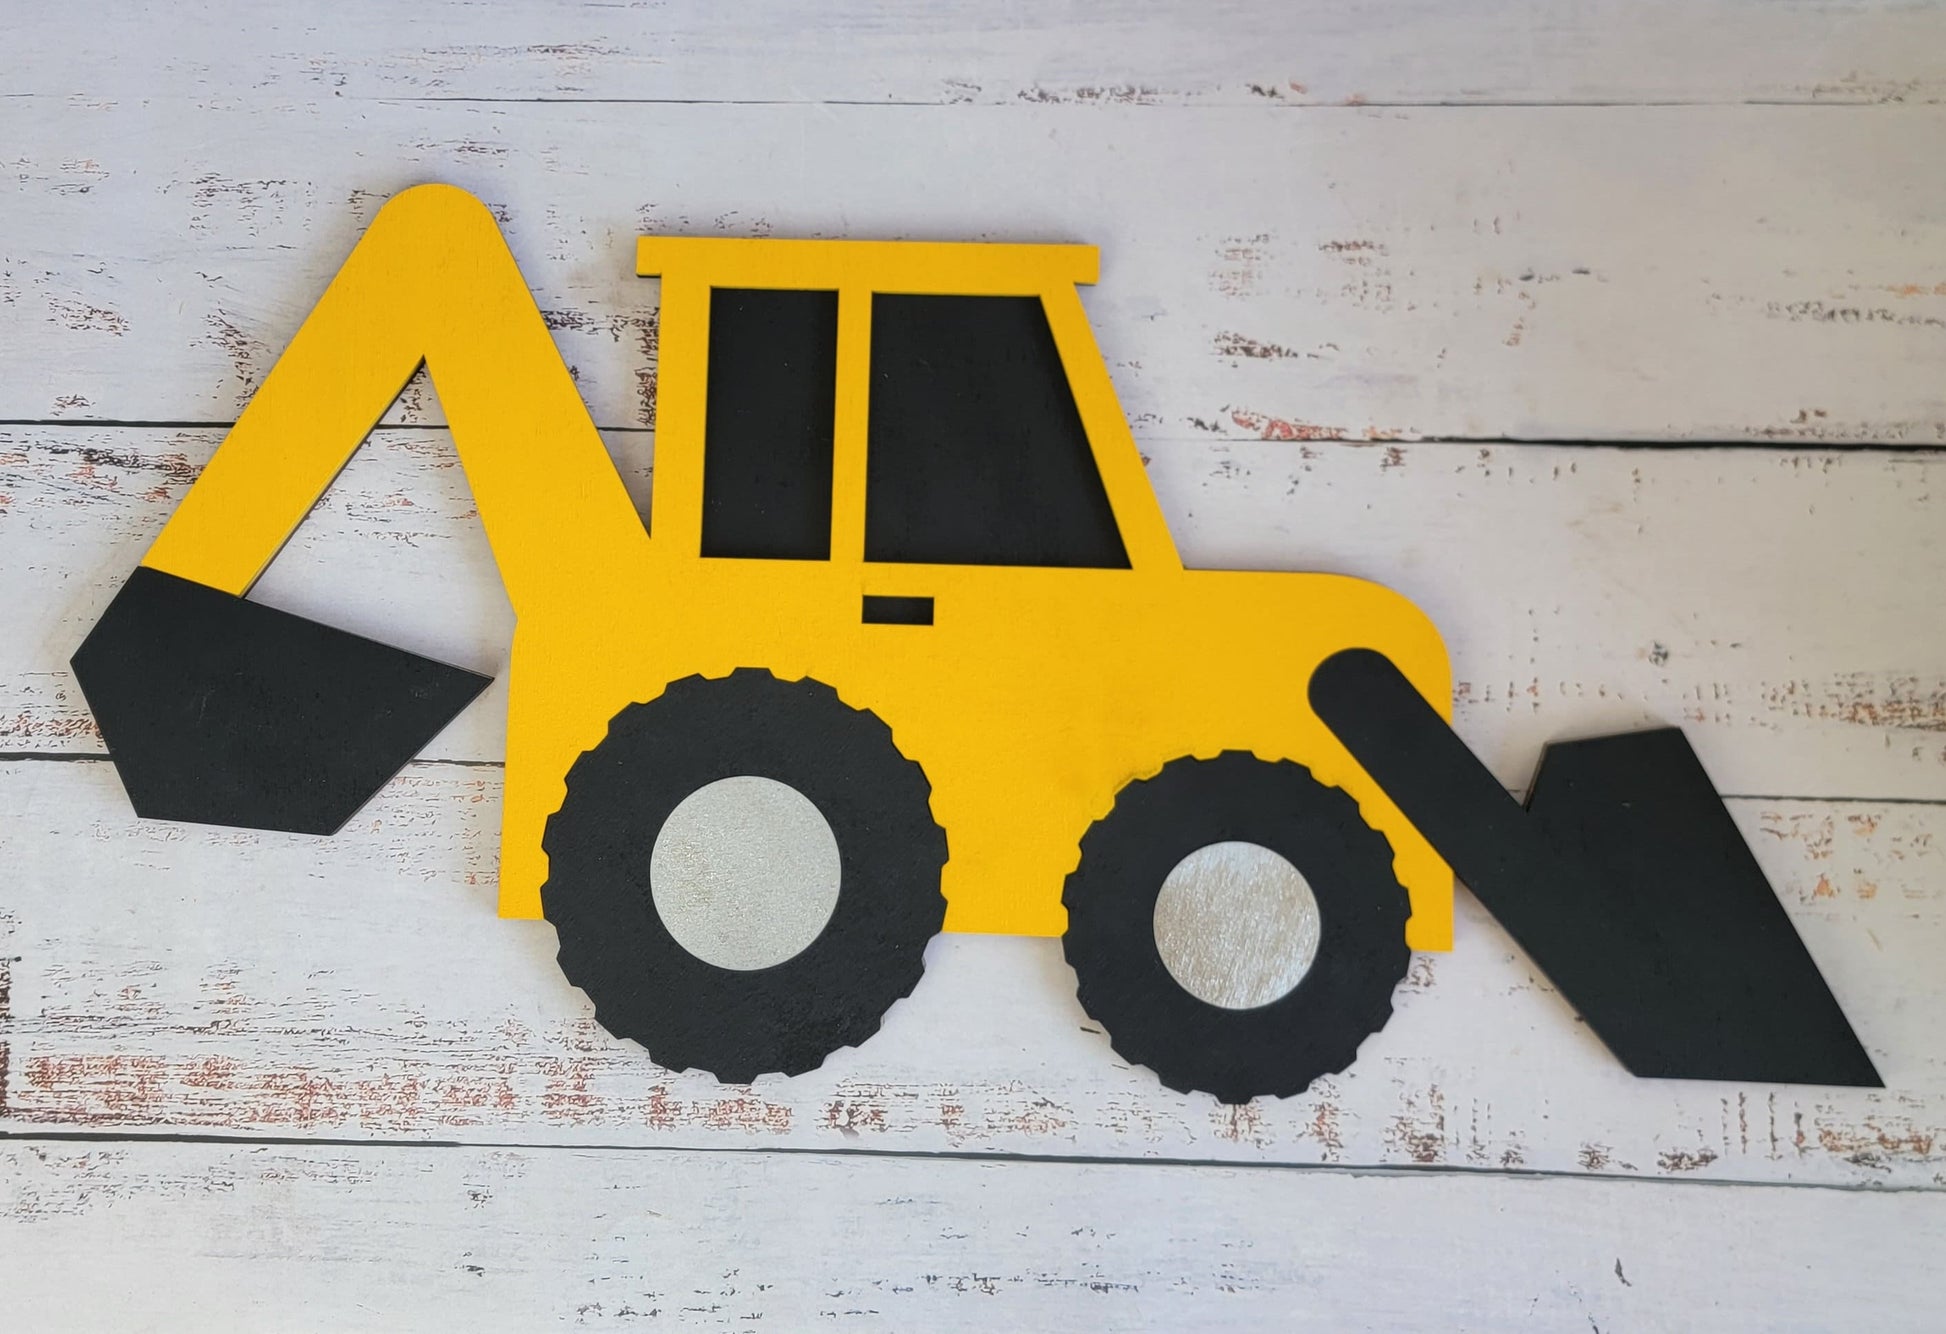 Wood Construction Wall Accessory, Construction Nursery Decor, Construction Kid Room Decor, Construction Party decor, Mixing Truck wall decor